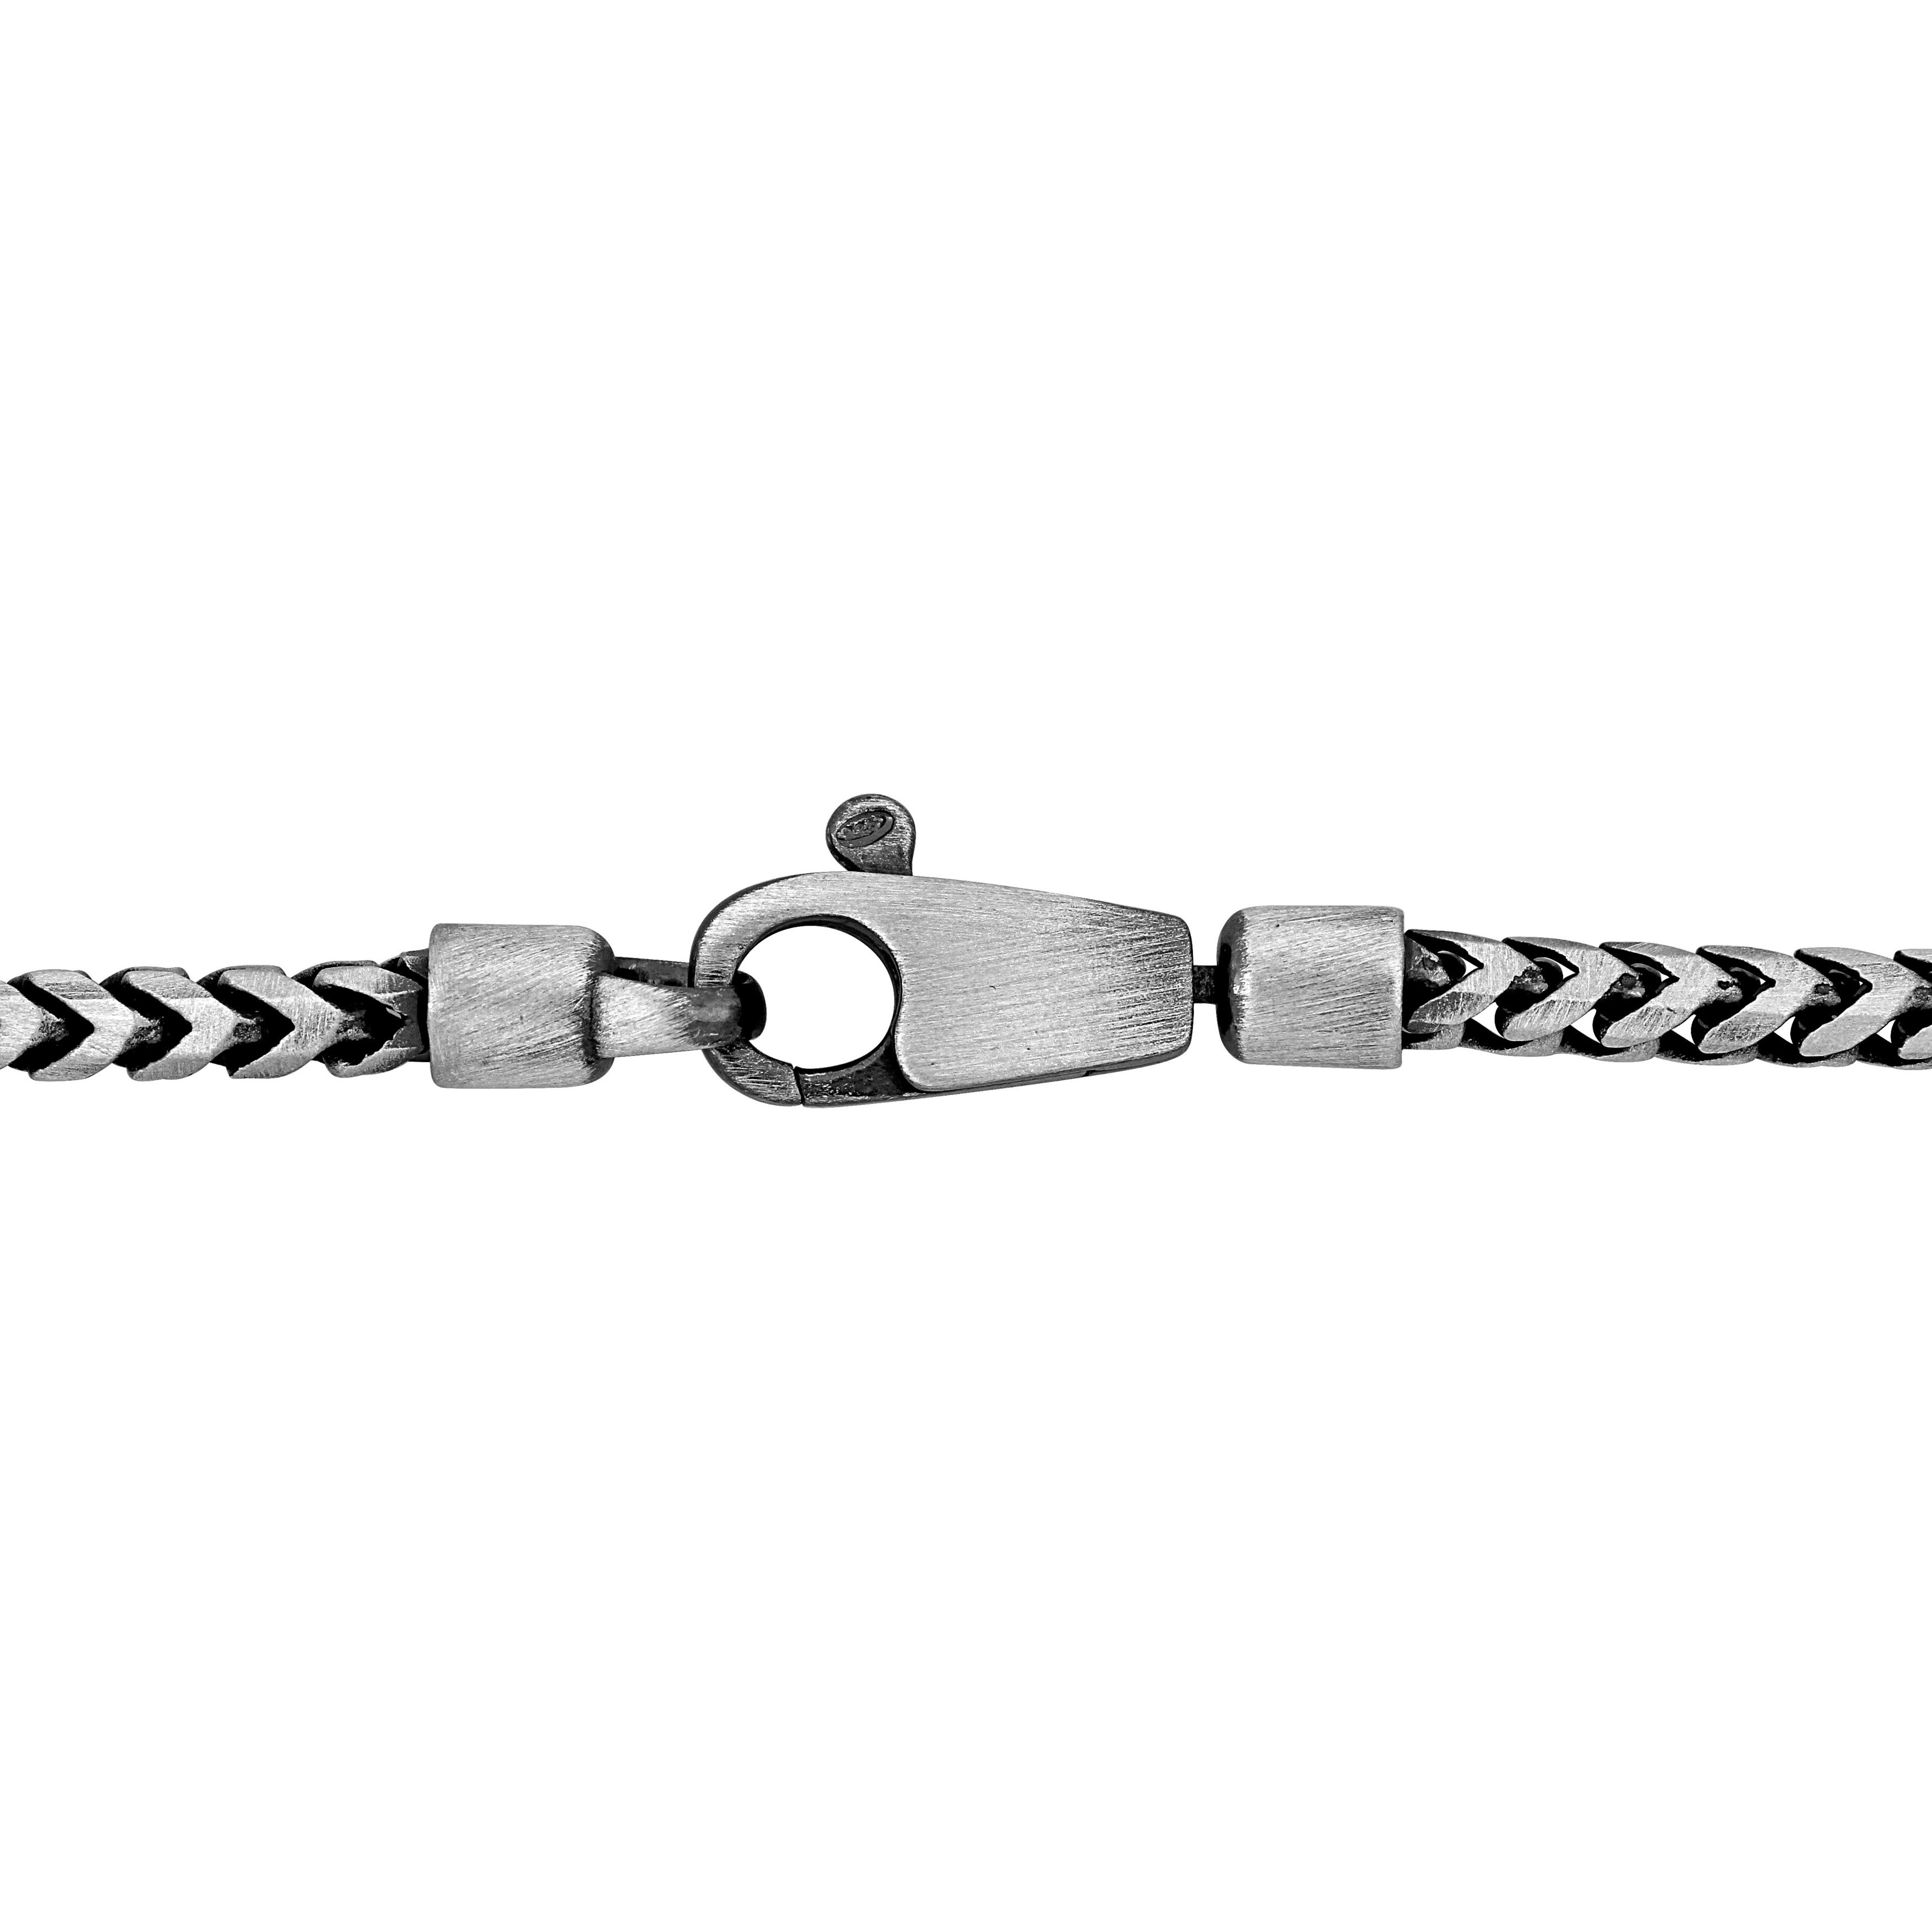 Franco Link Necklace in Oxidized Sterling Silver - 20 in.